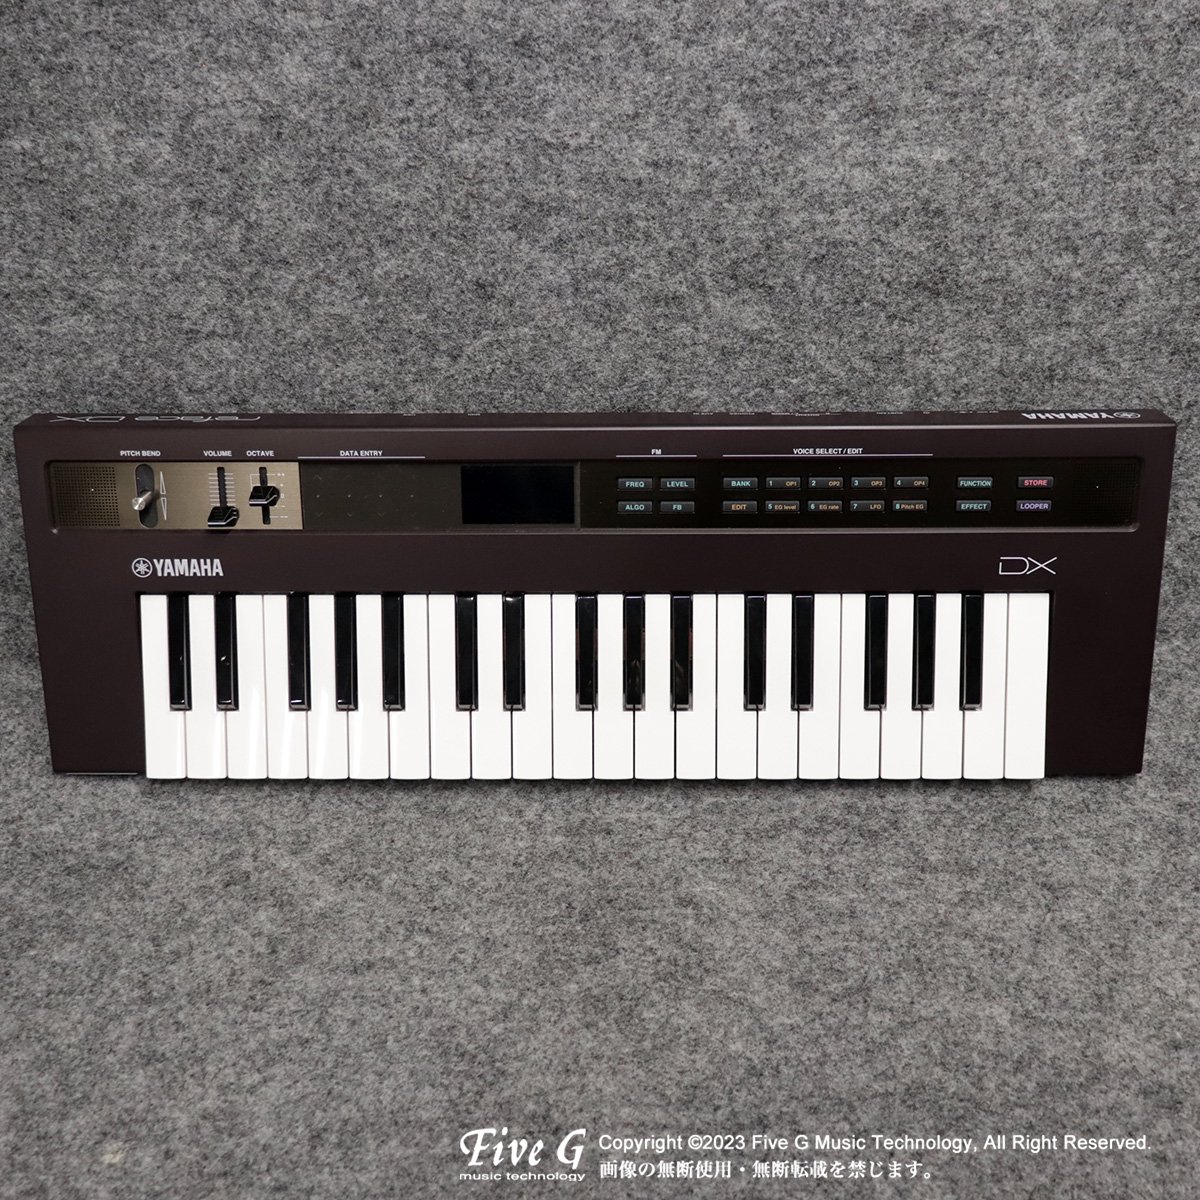 YAMAHA | reface DX | 中古 - Used - シンセサイザー キーボード